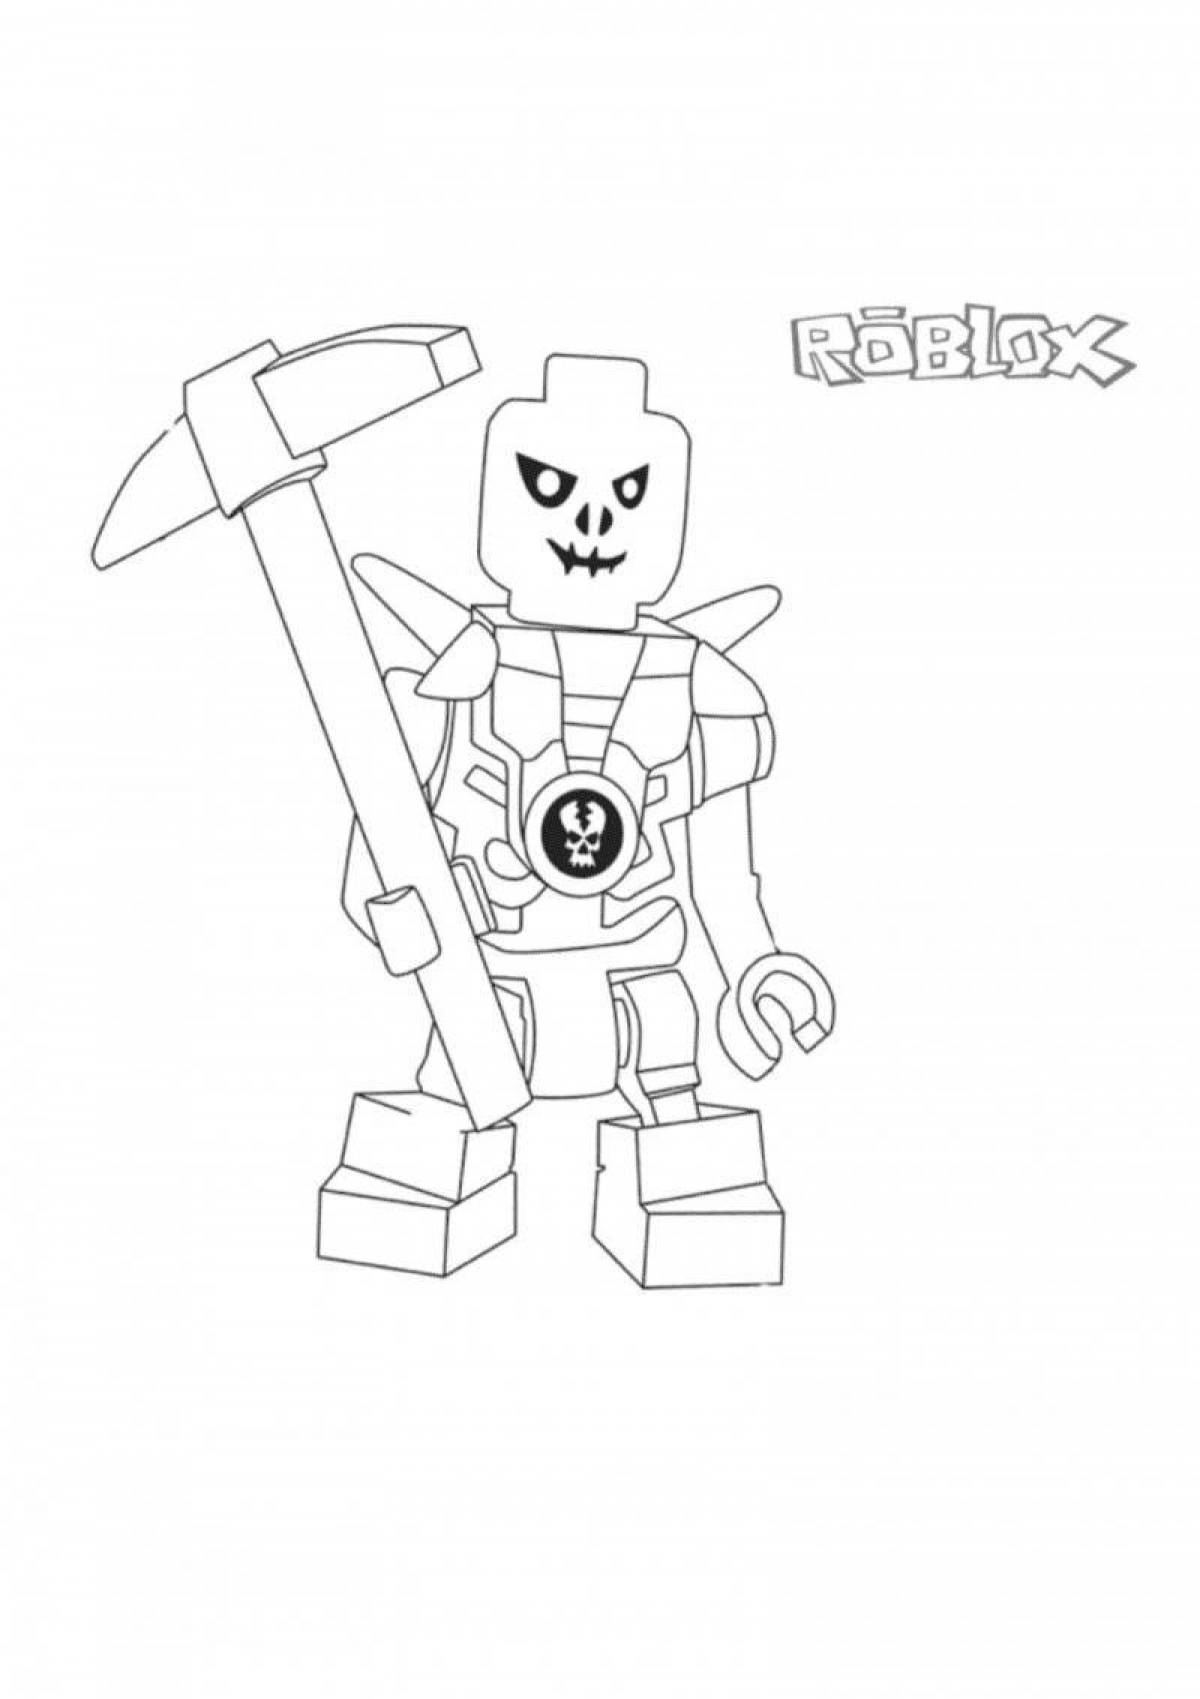 Colorful and detailed robloxers coloring pages